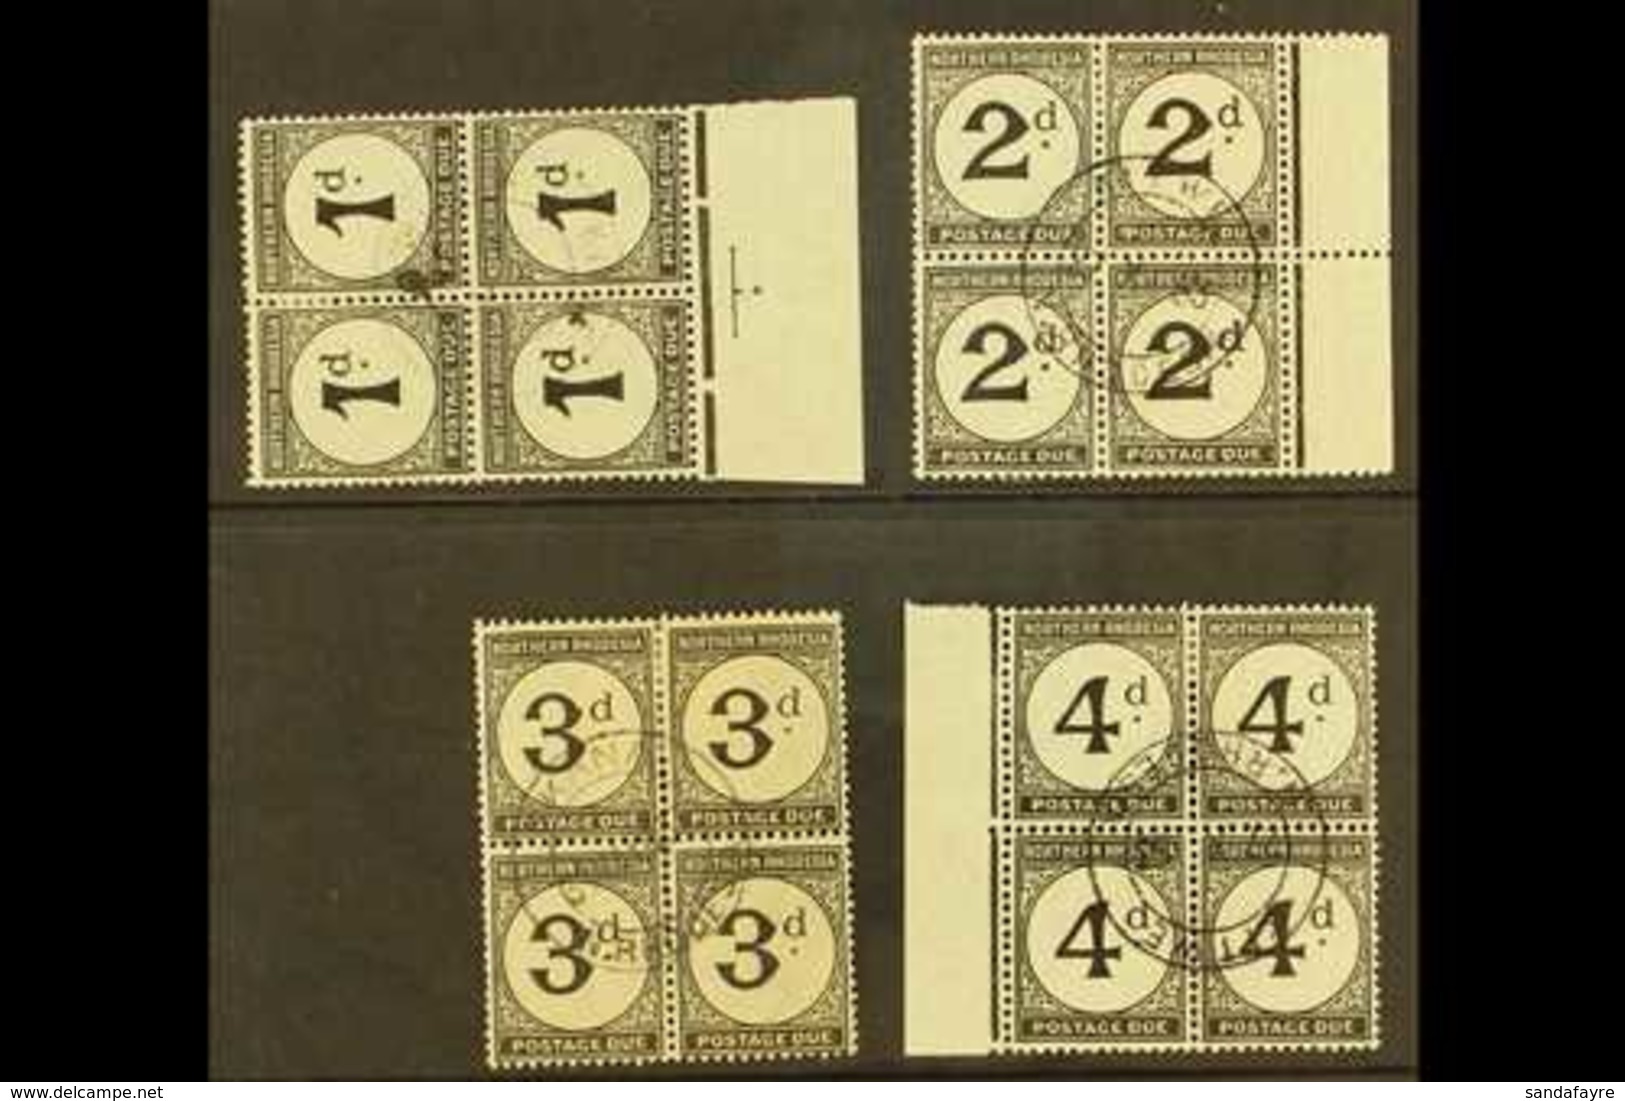 POSTAGE DUES 1929-52 Set On Ordinary Paper, BLOCKS OF 4, SG D1/4, 1d Tone Spot, 3d Slightly Toned Paper, Otherwise Very  - Northern Rhodesia (...-1963)